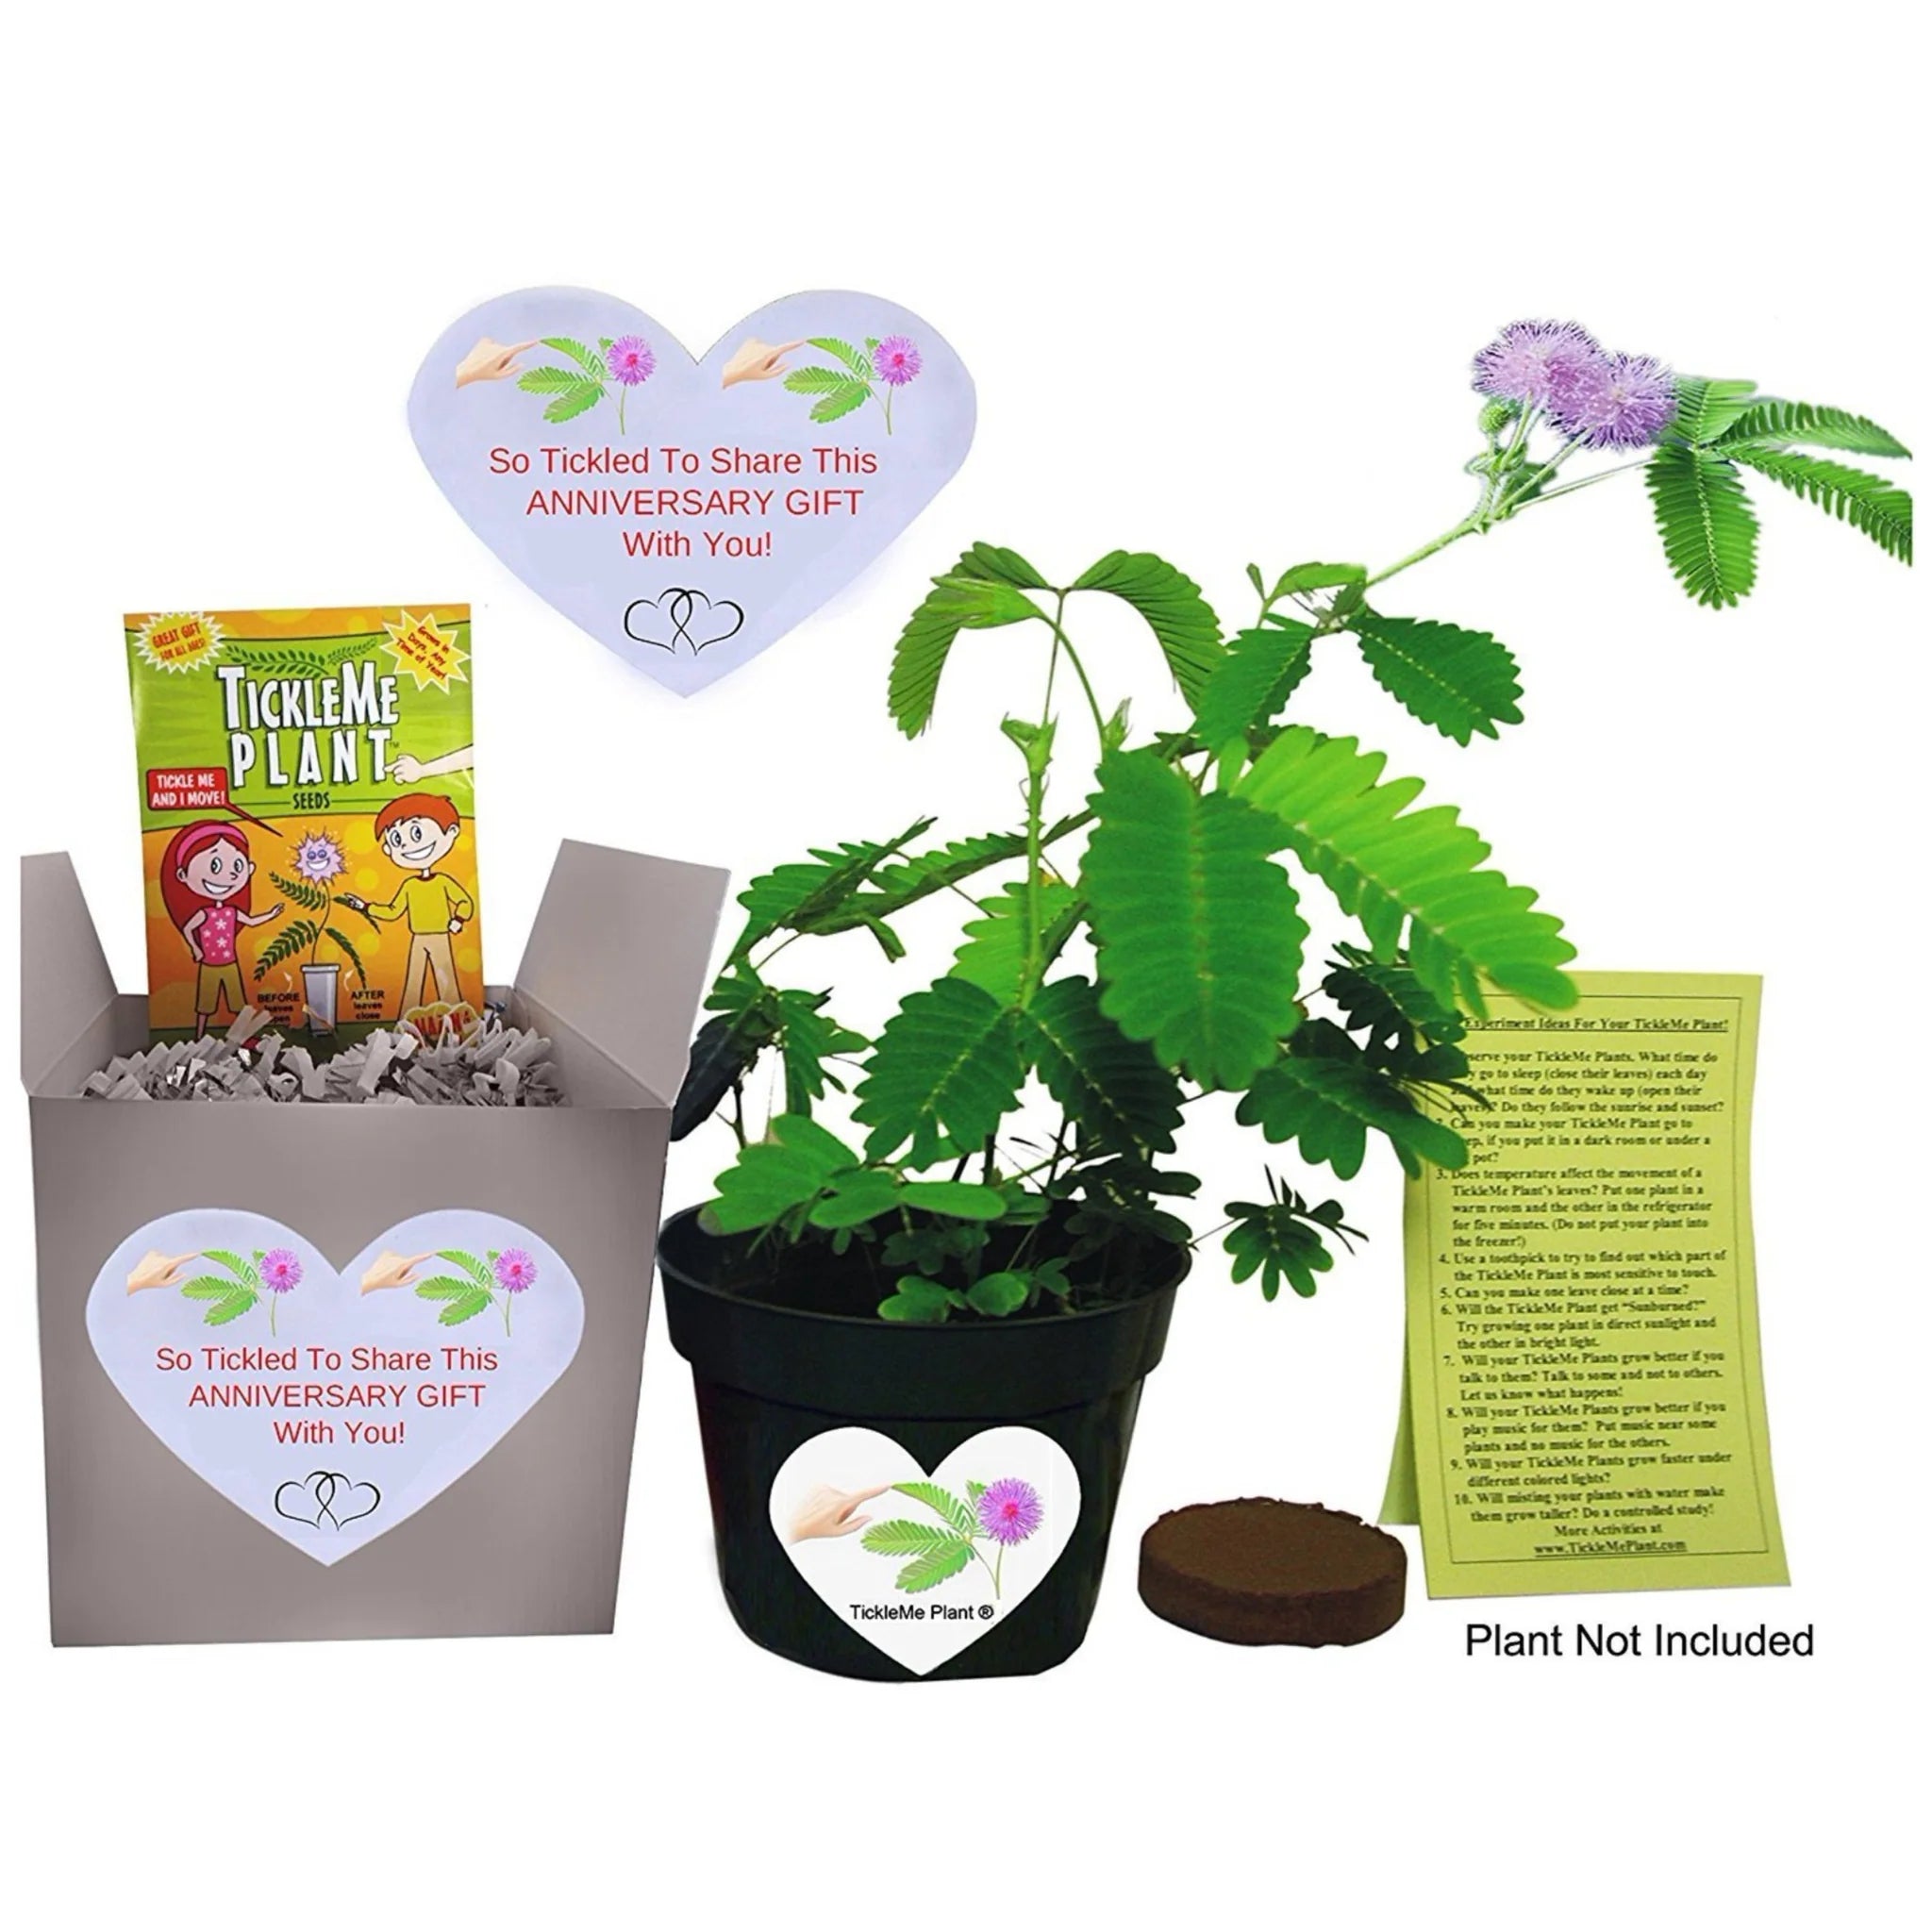 Grow Your Own TickleMe Plant / ZOMBIE PLANT at Home! Mimosa pudica –  TickleMe Plant Company